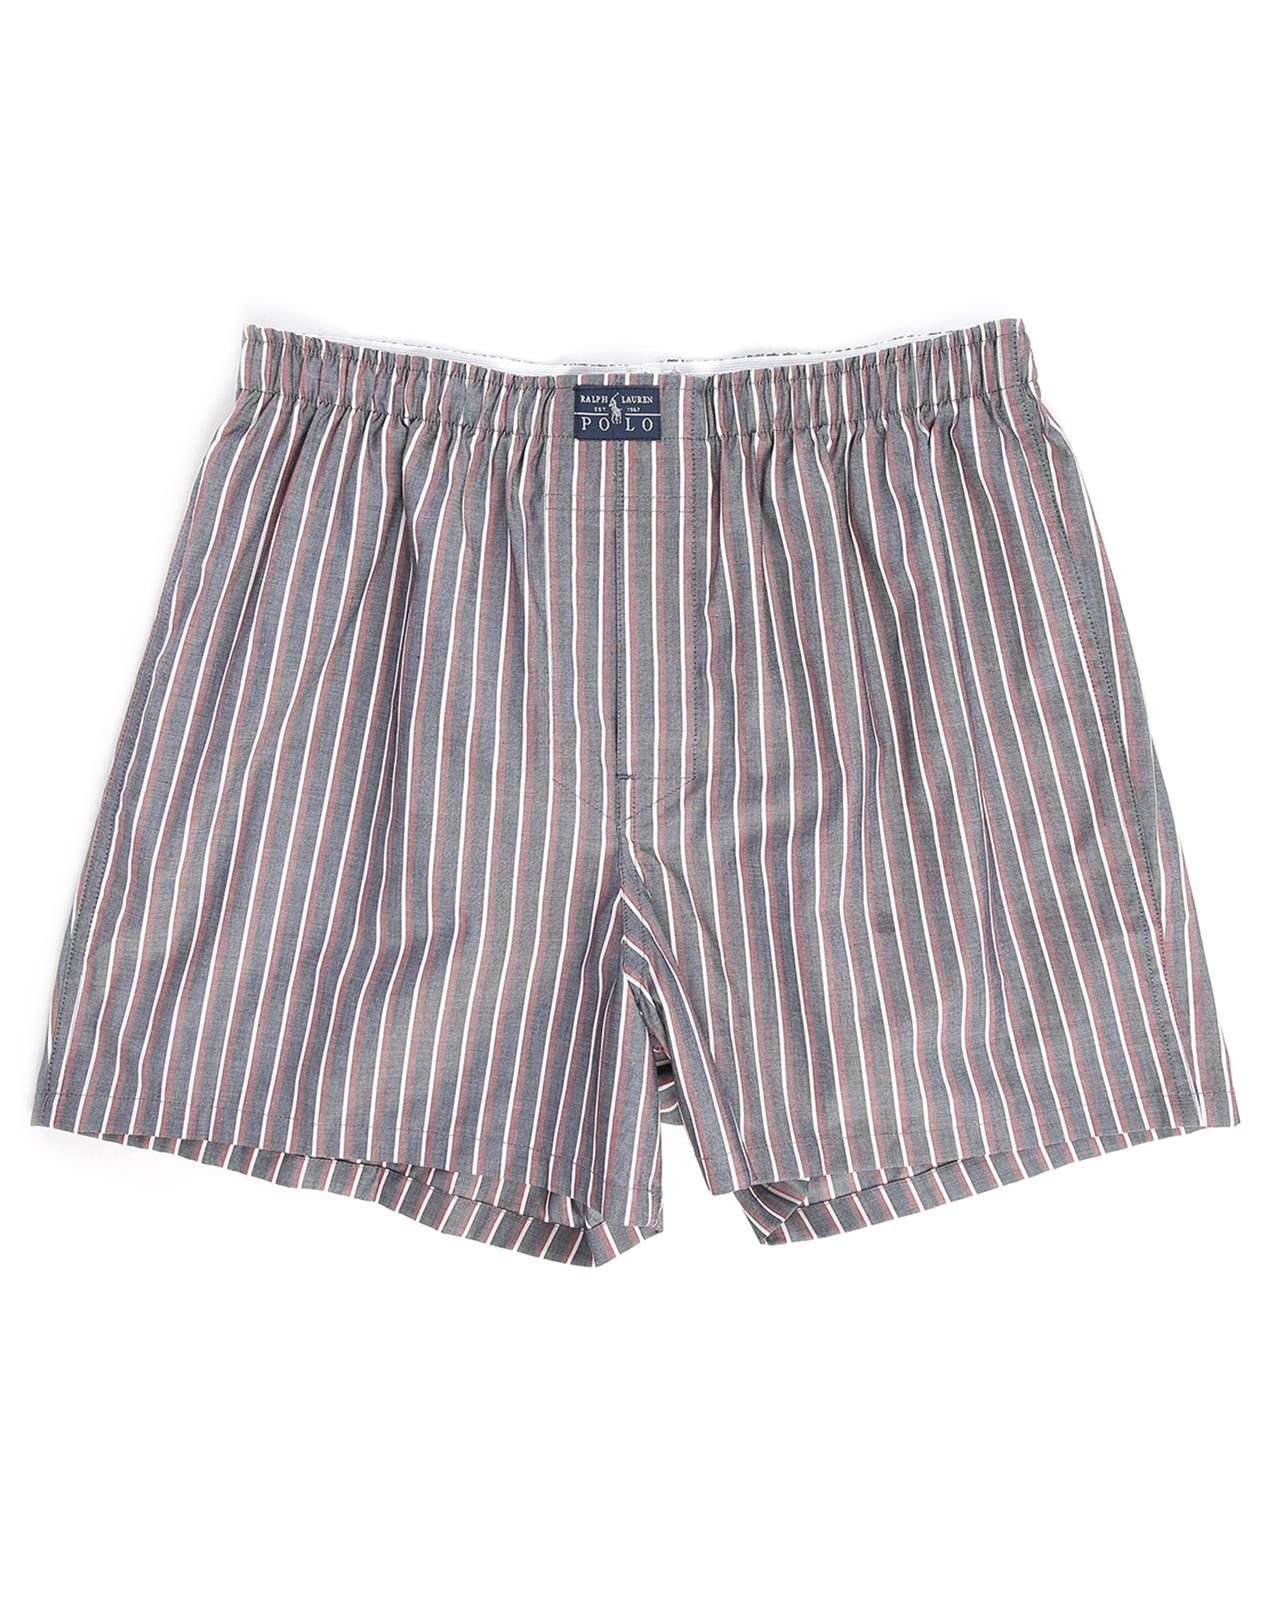 Polo ralph lauren Grey/red/white Striped Boxer Shorts in Gray for Men ...